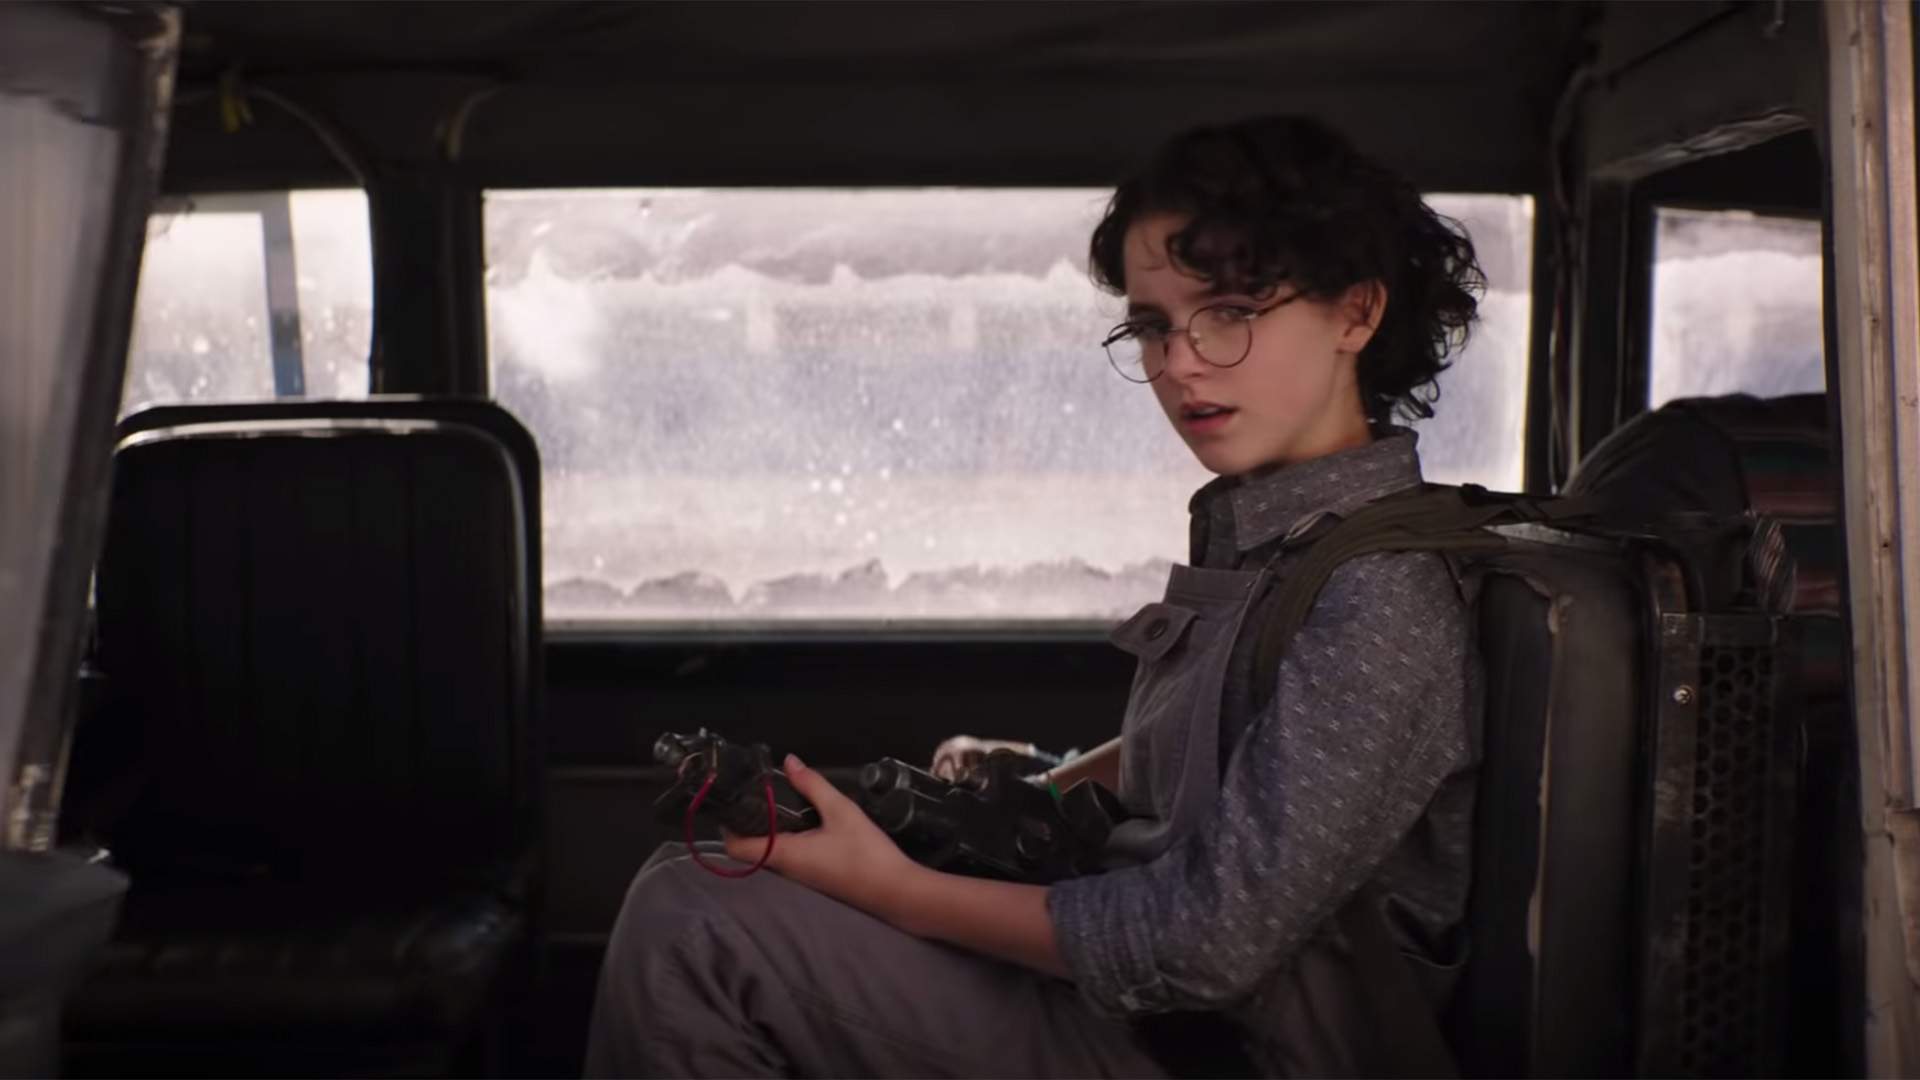 The Spooky 'Stranger Things'-Esque First Trailer for 'Ghostbusters: Afterlife' Is Here